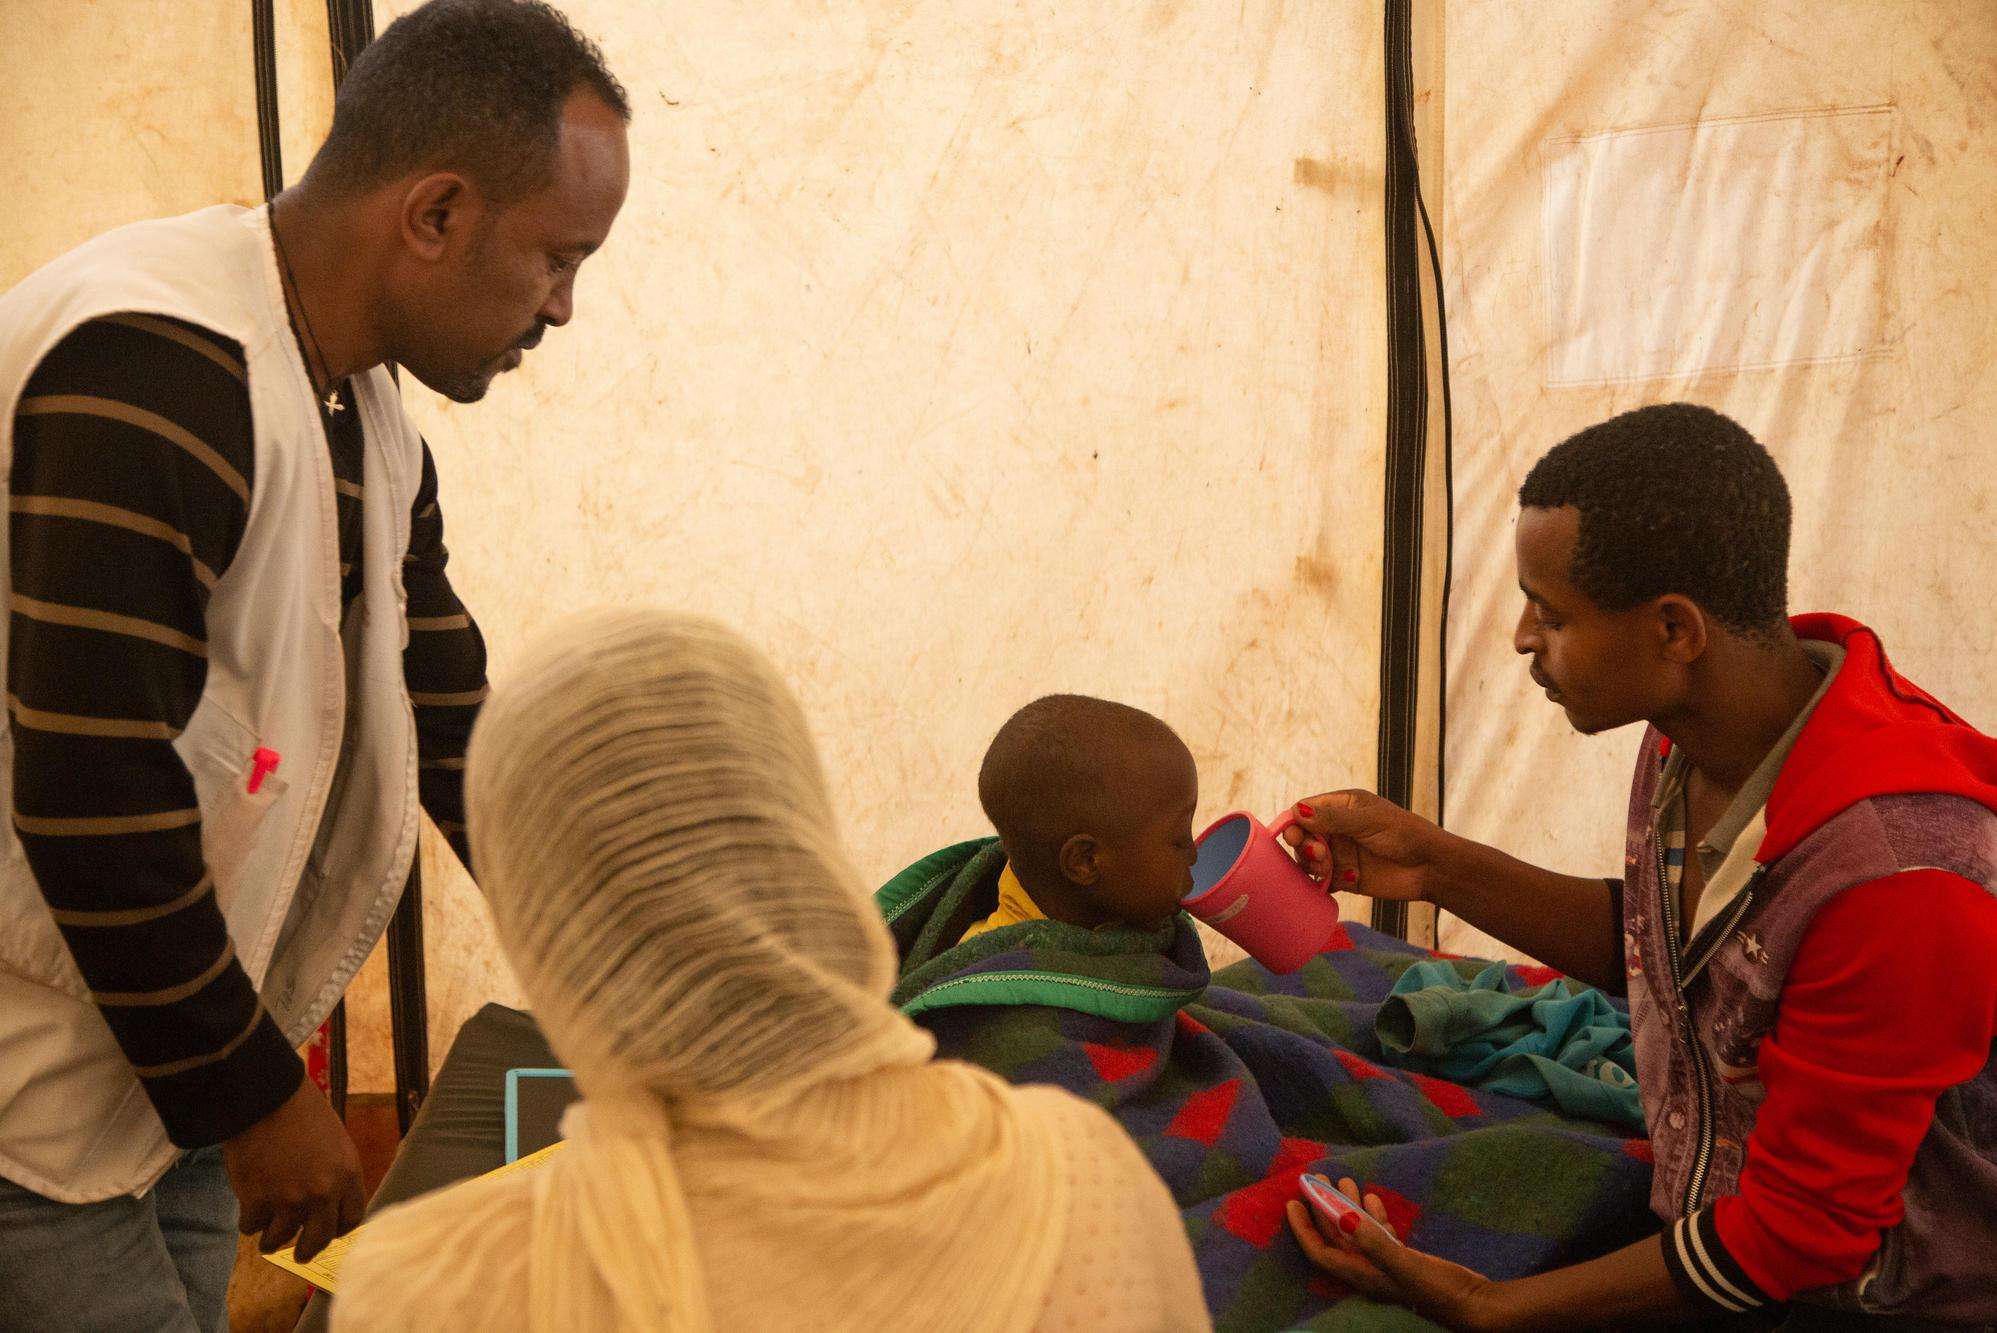 Ethiopia: The constant cycle of displacement